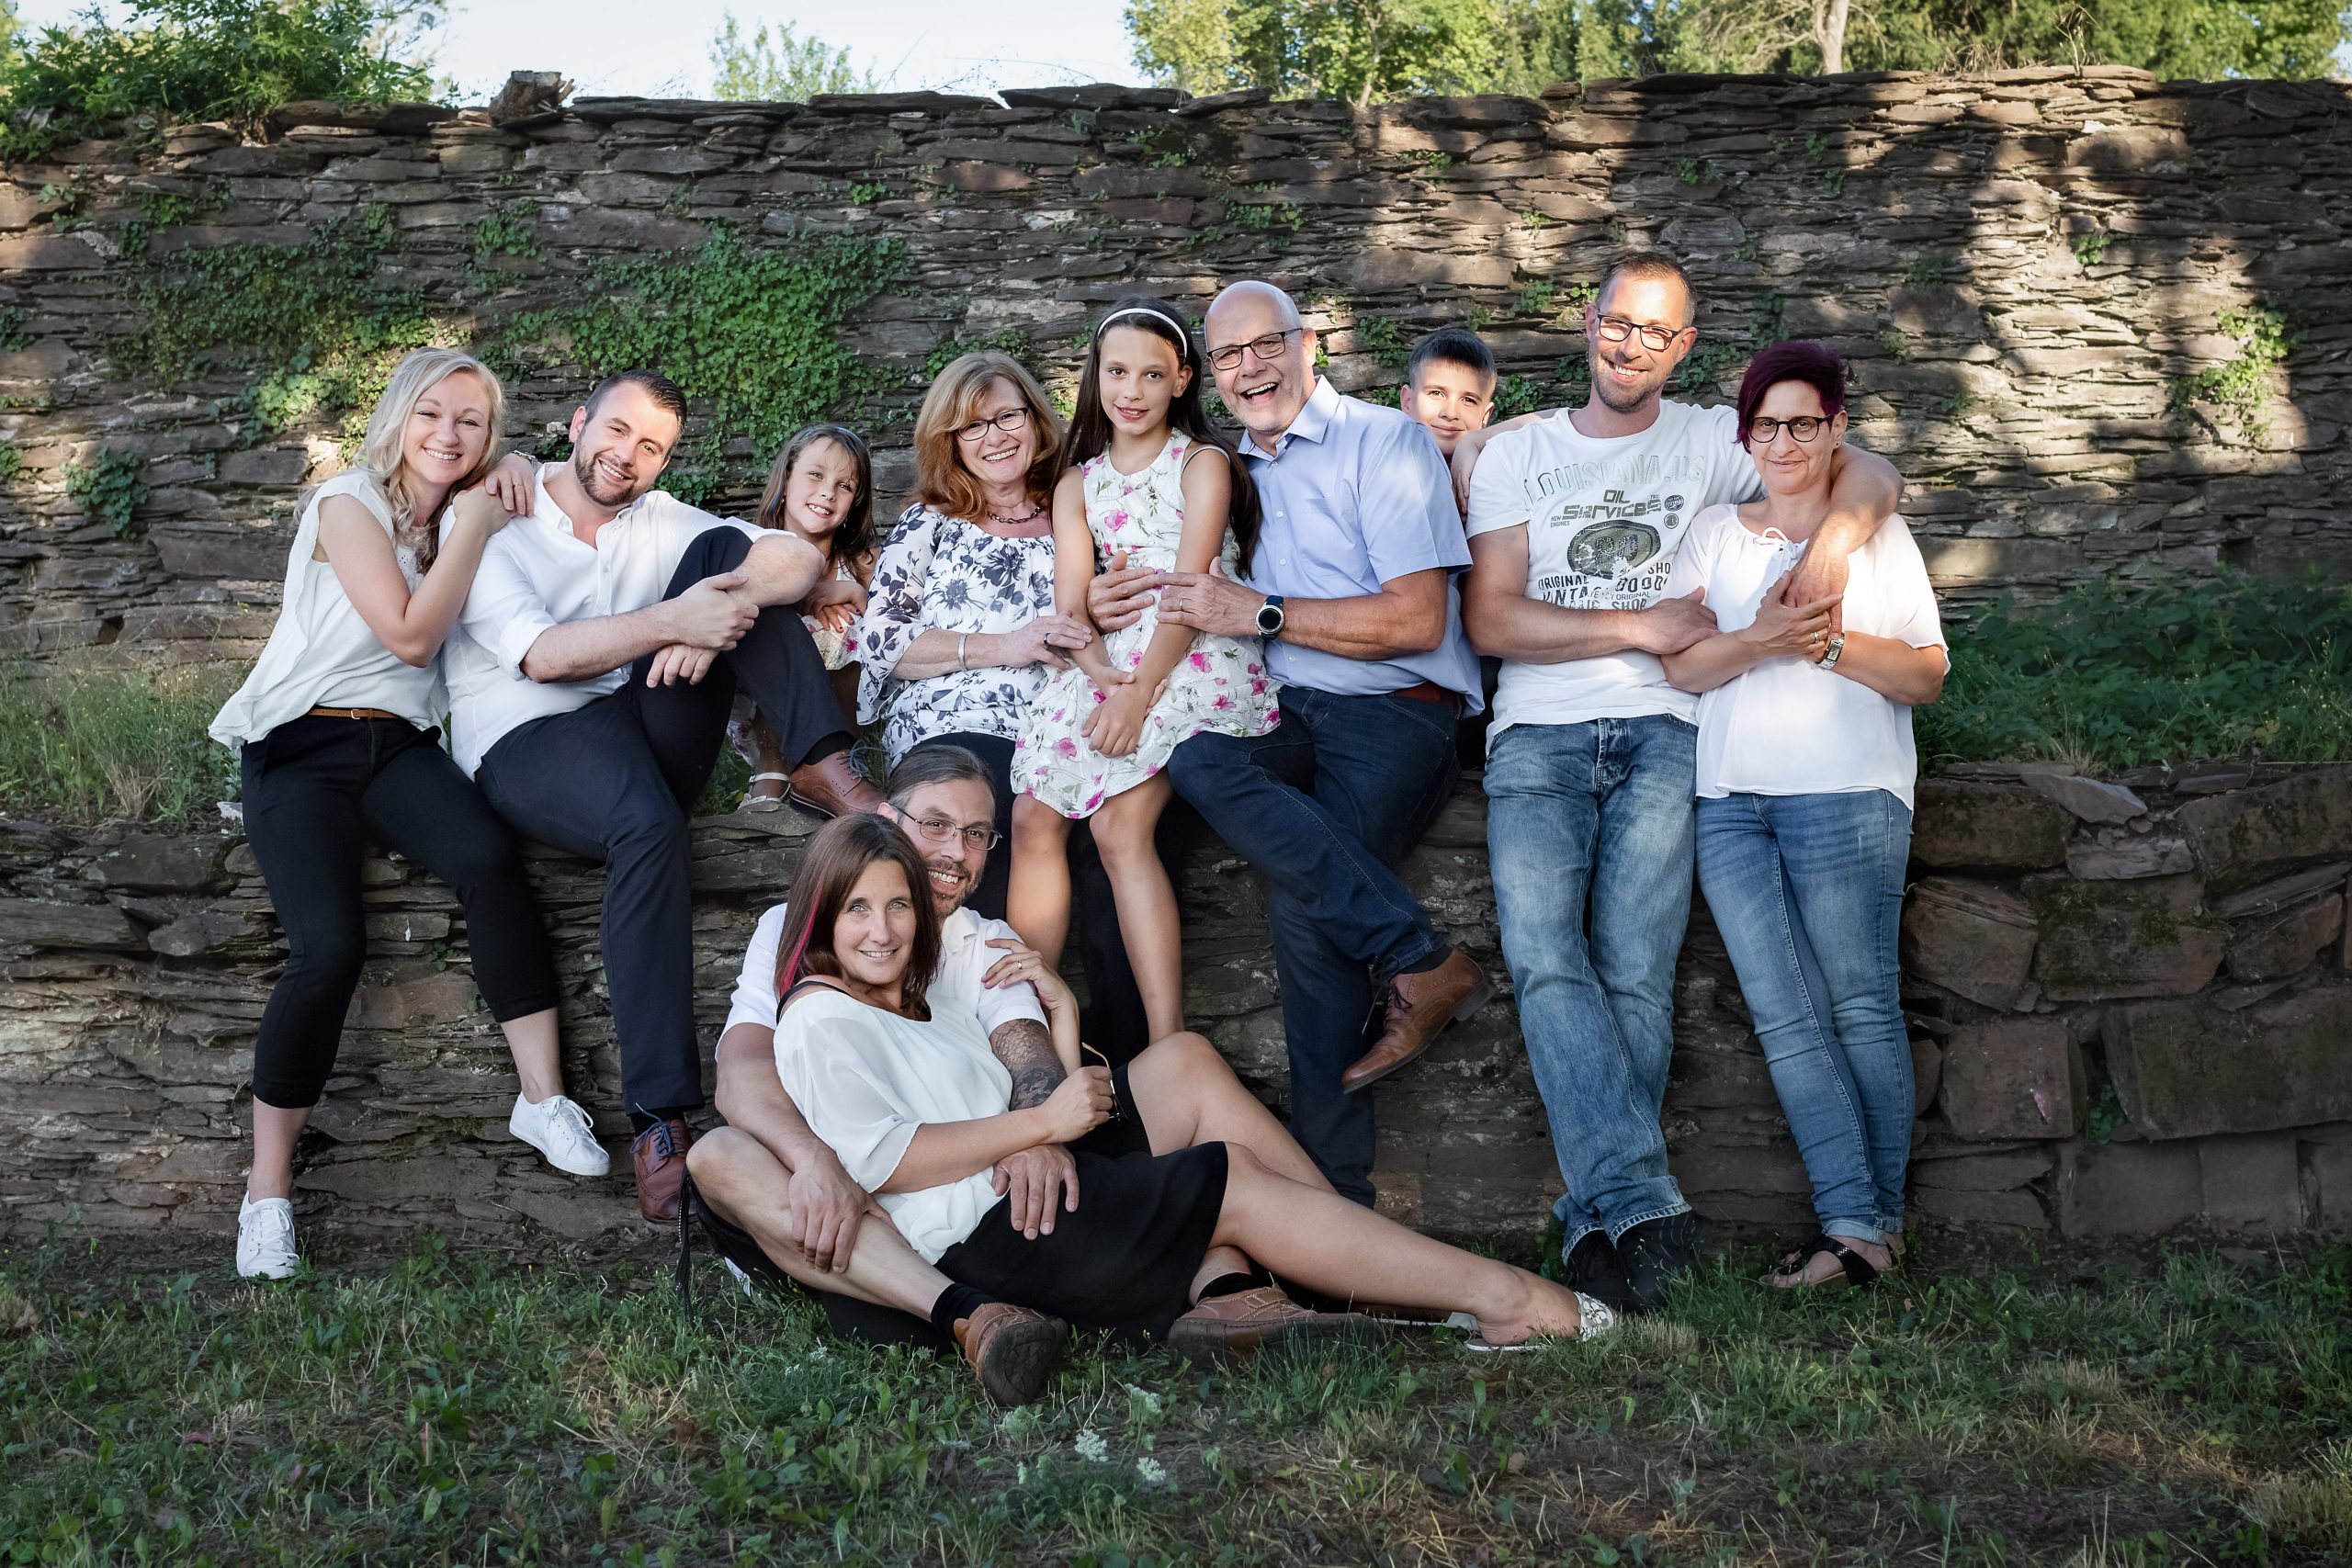 Familiensession, Fotoshooting, Andrea Schenke Photography, Fotografin Wittlich, outdoor